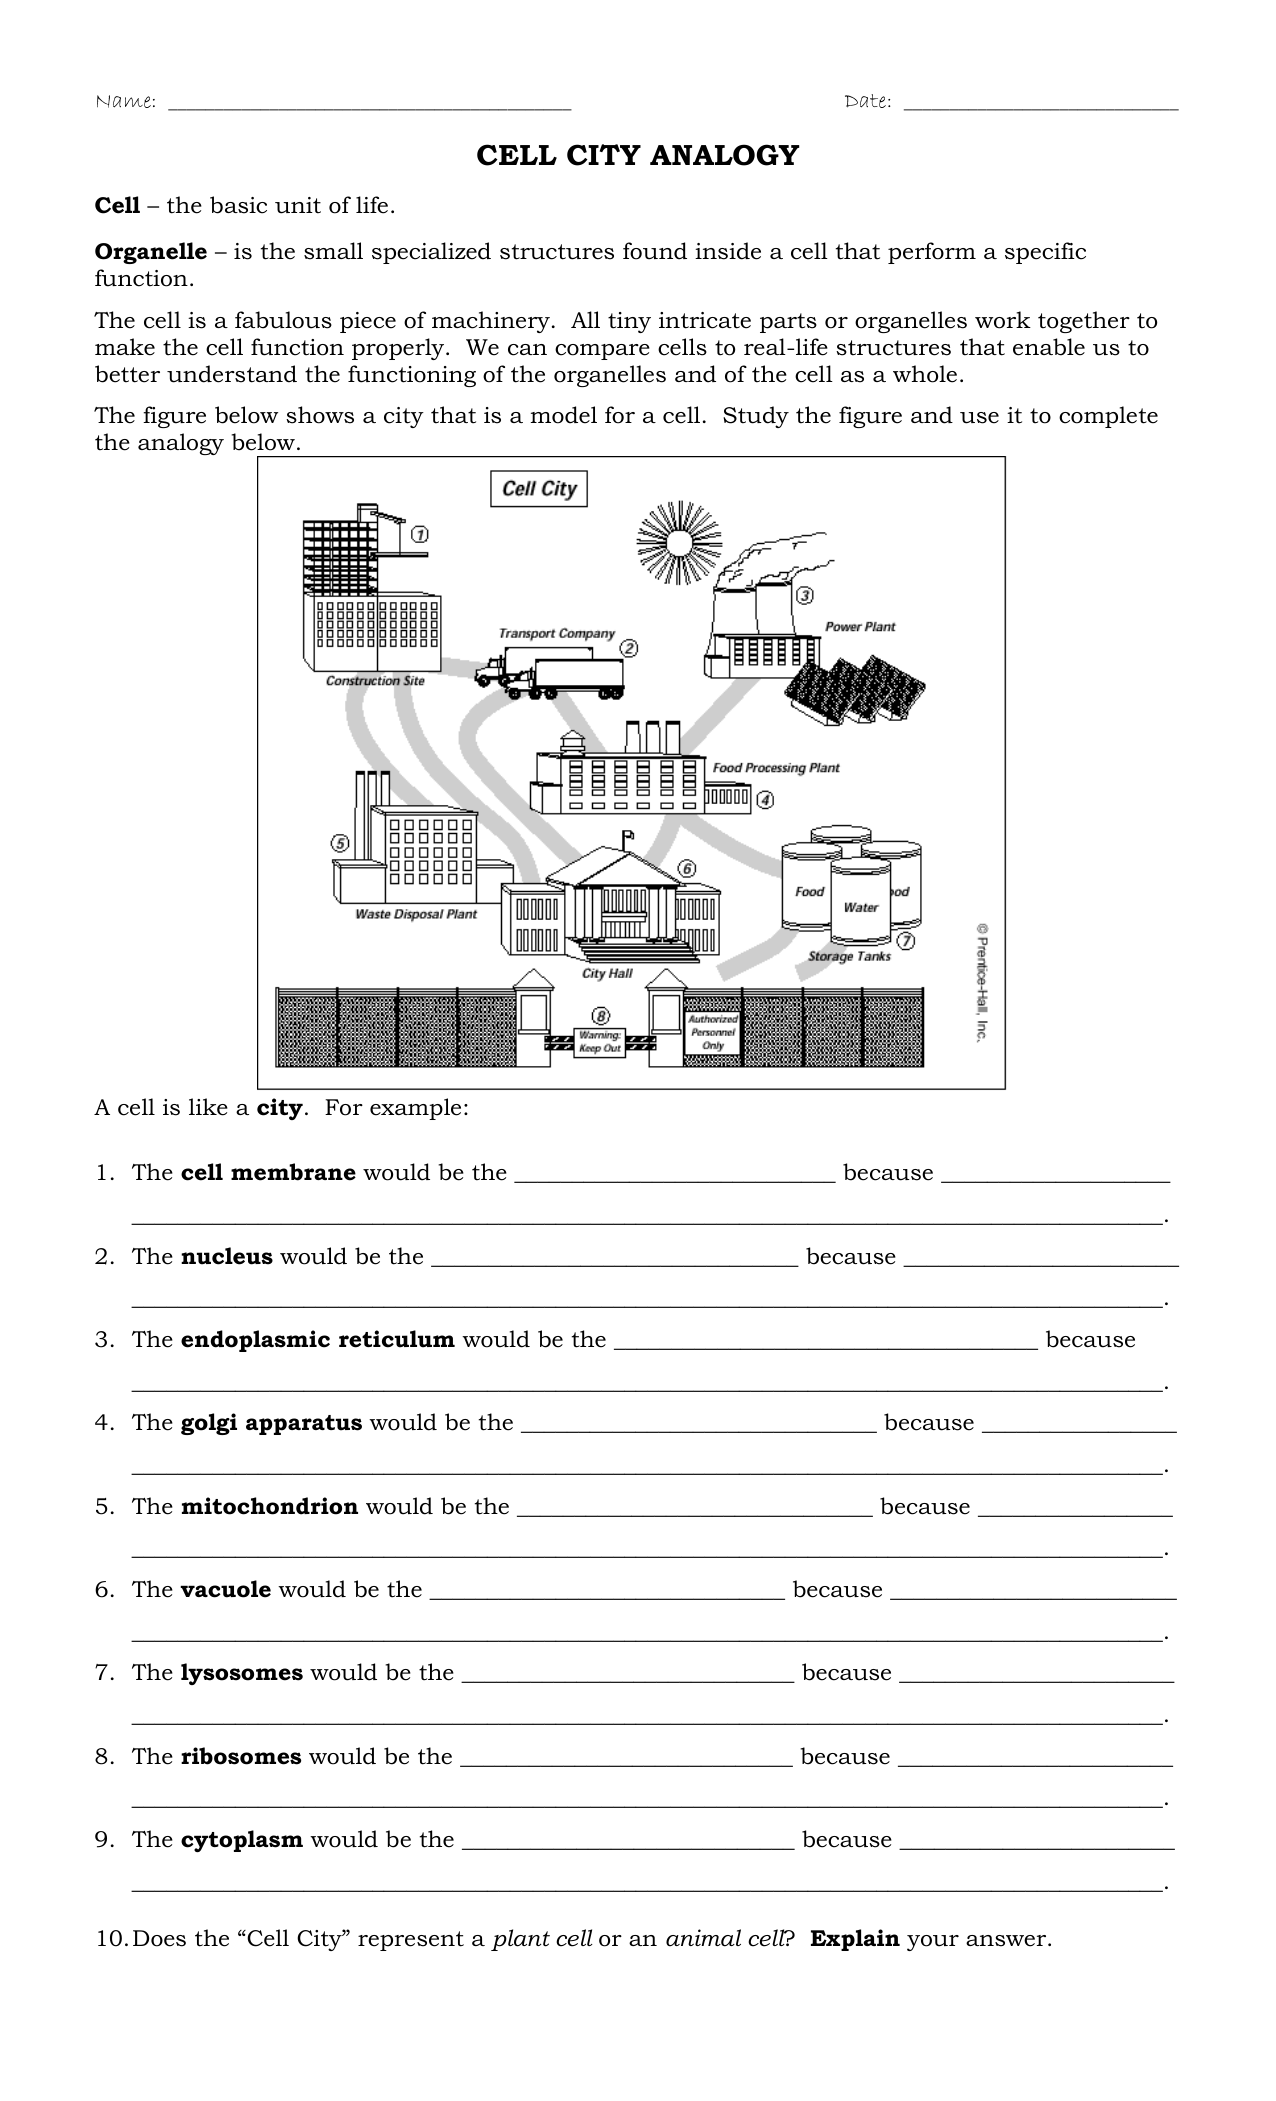 CellCityAnaolgyWS With Regard To Cell City Analogy Worksheet Answers